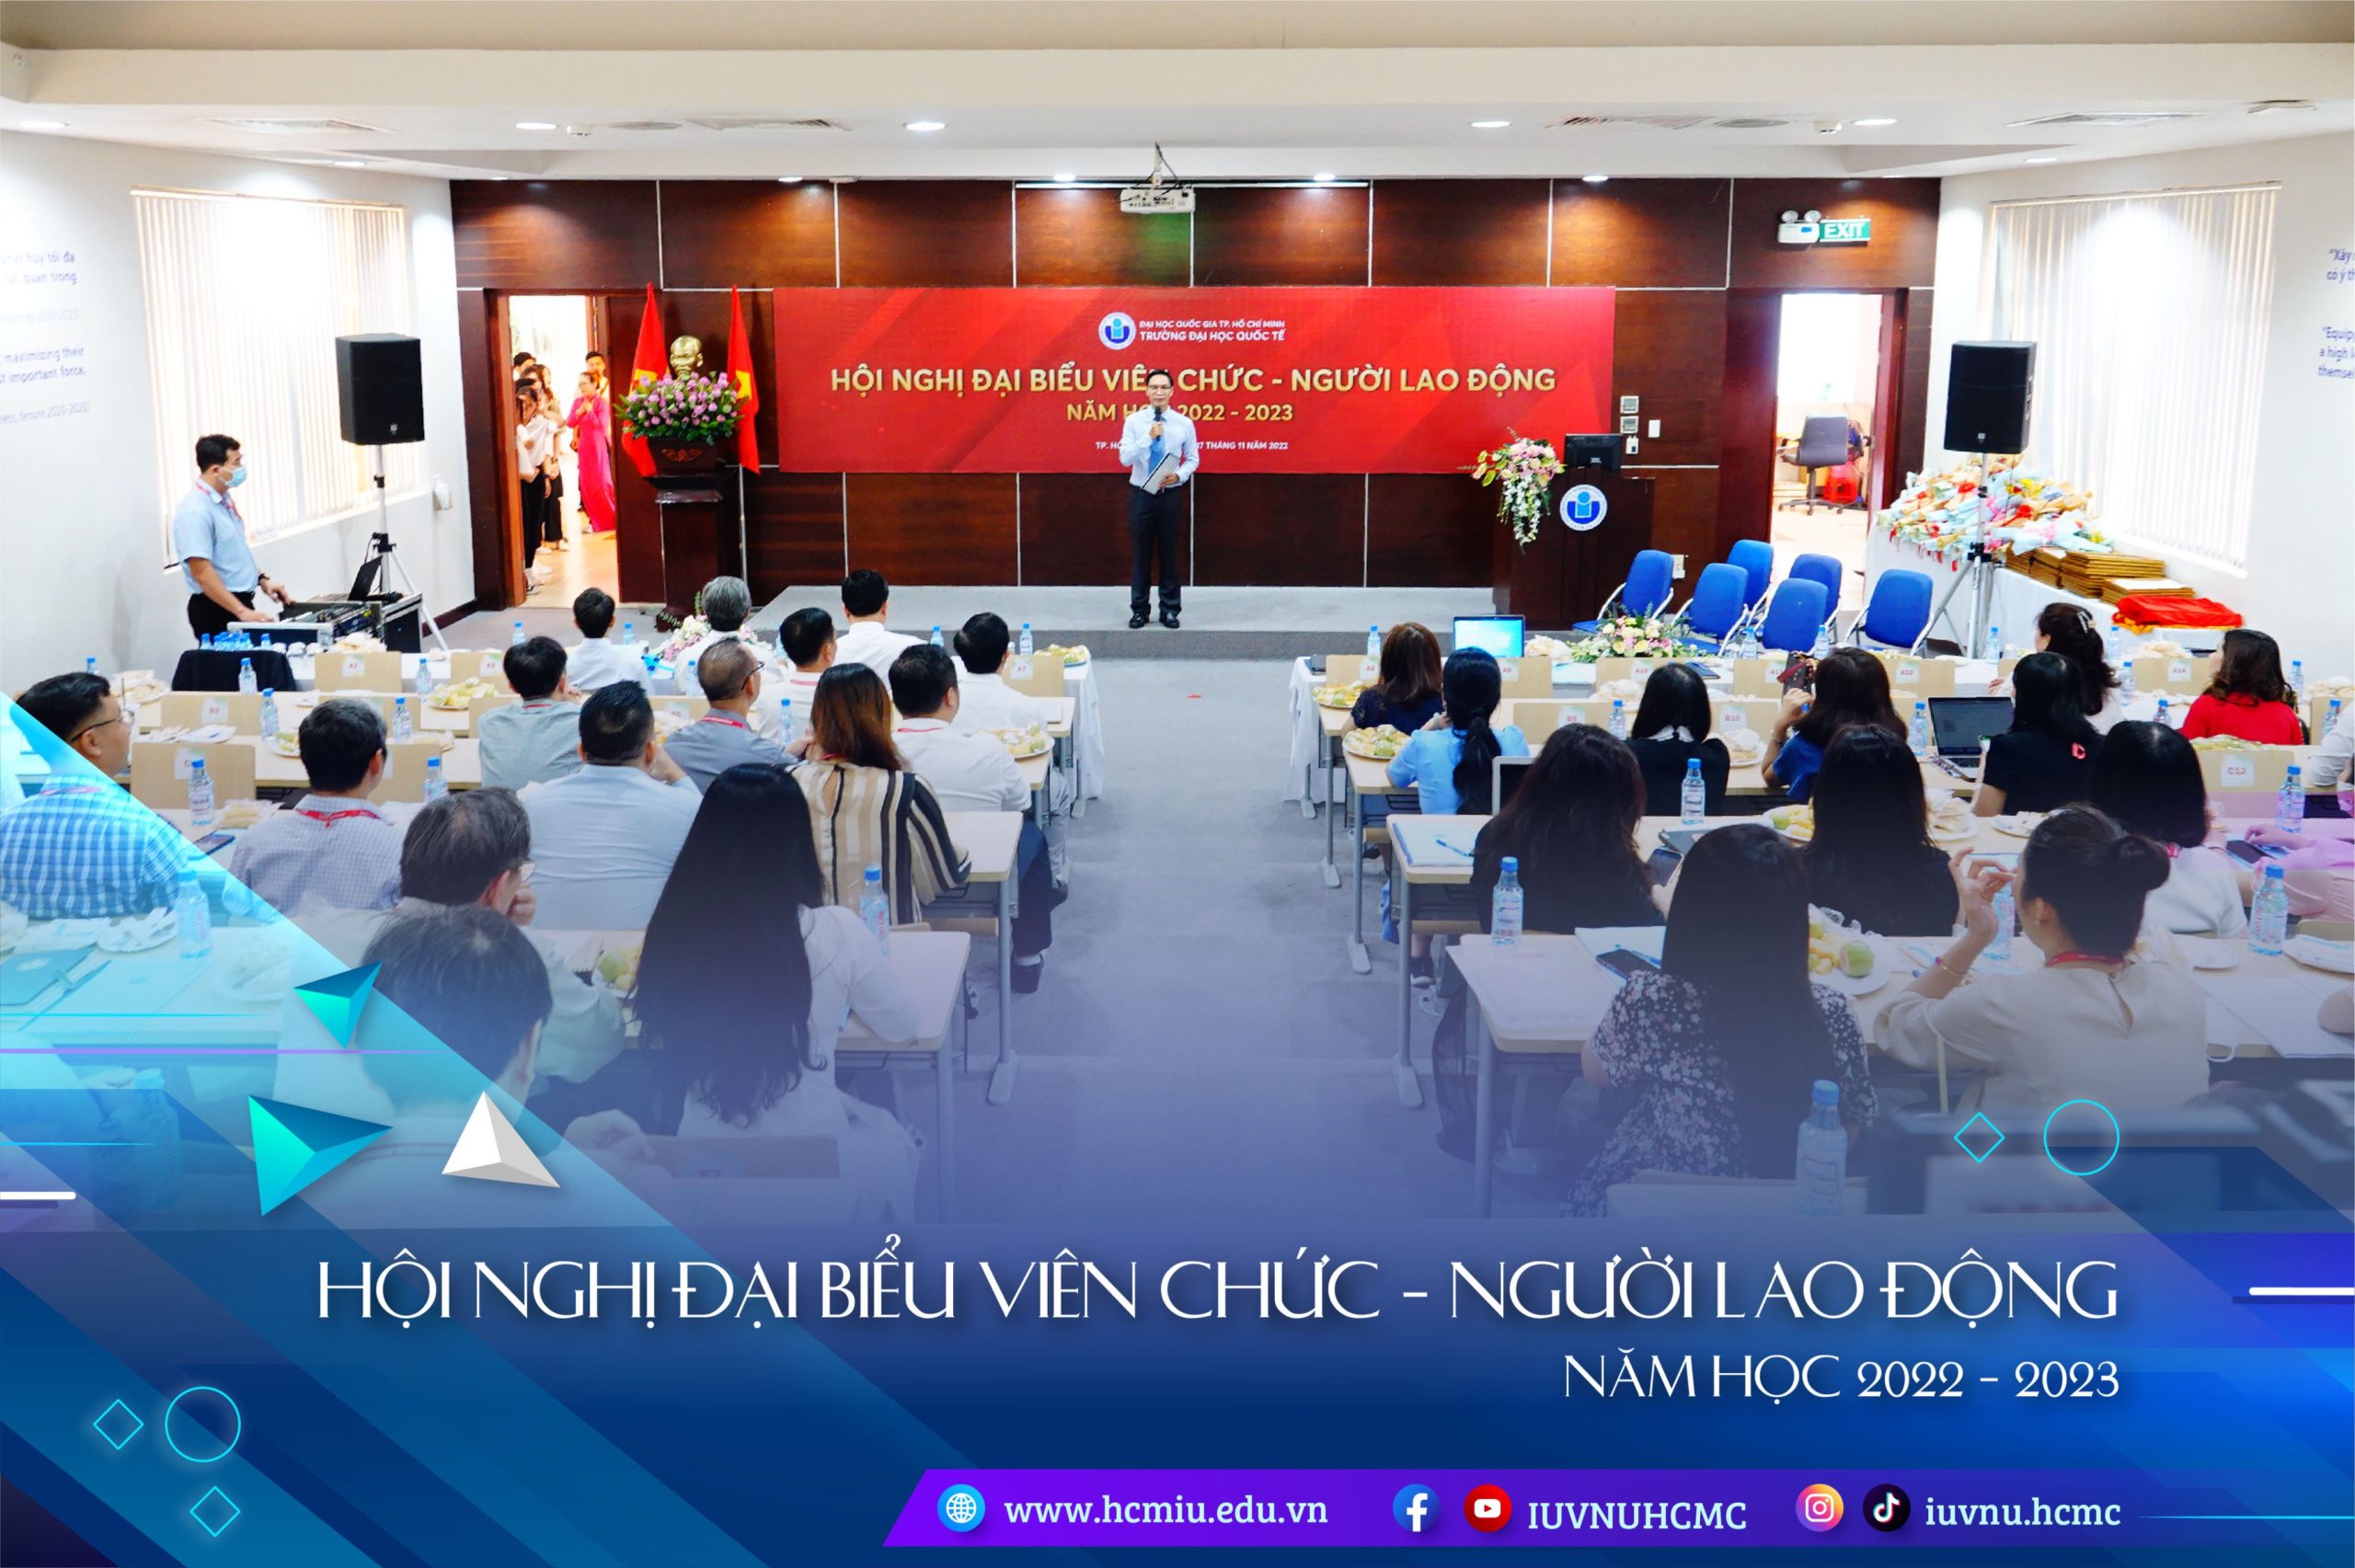 THE CONFERENCE OF OFFICERS AND EMPLOYEES FOR THE ACADEMIC YEAR 2022-2023